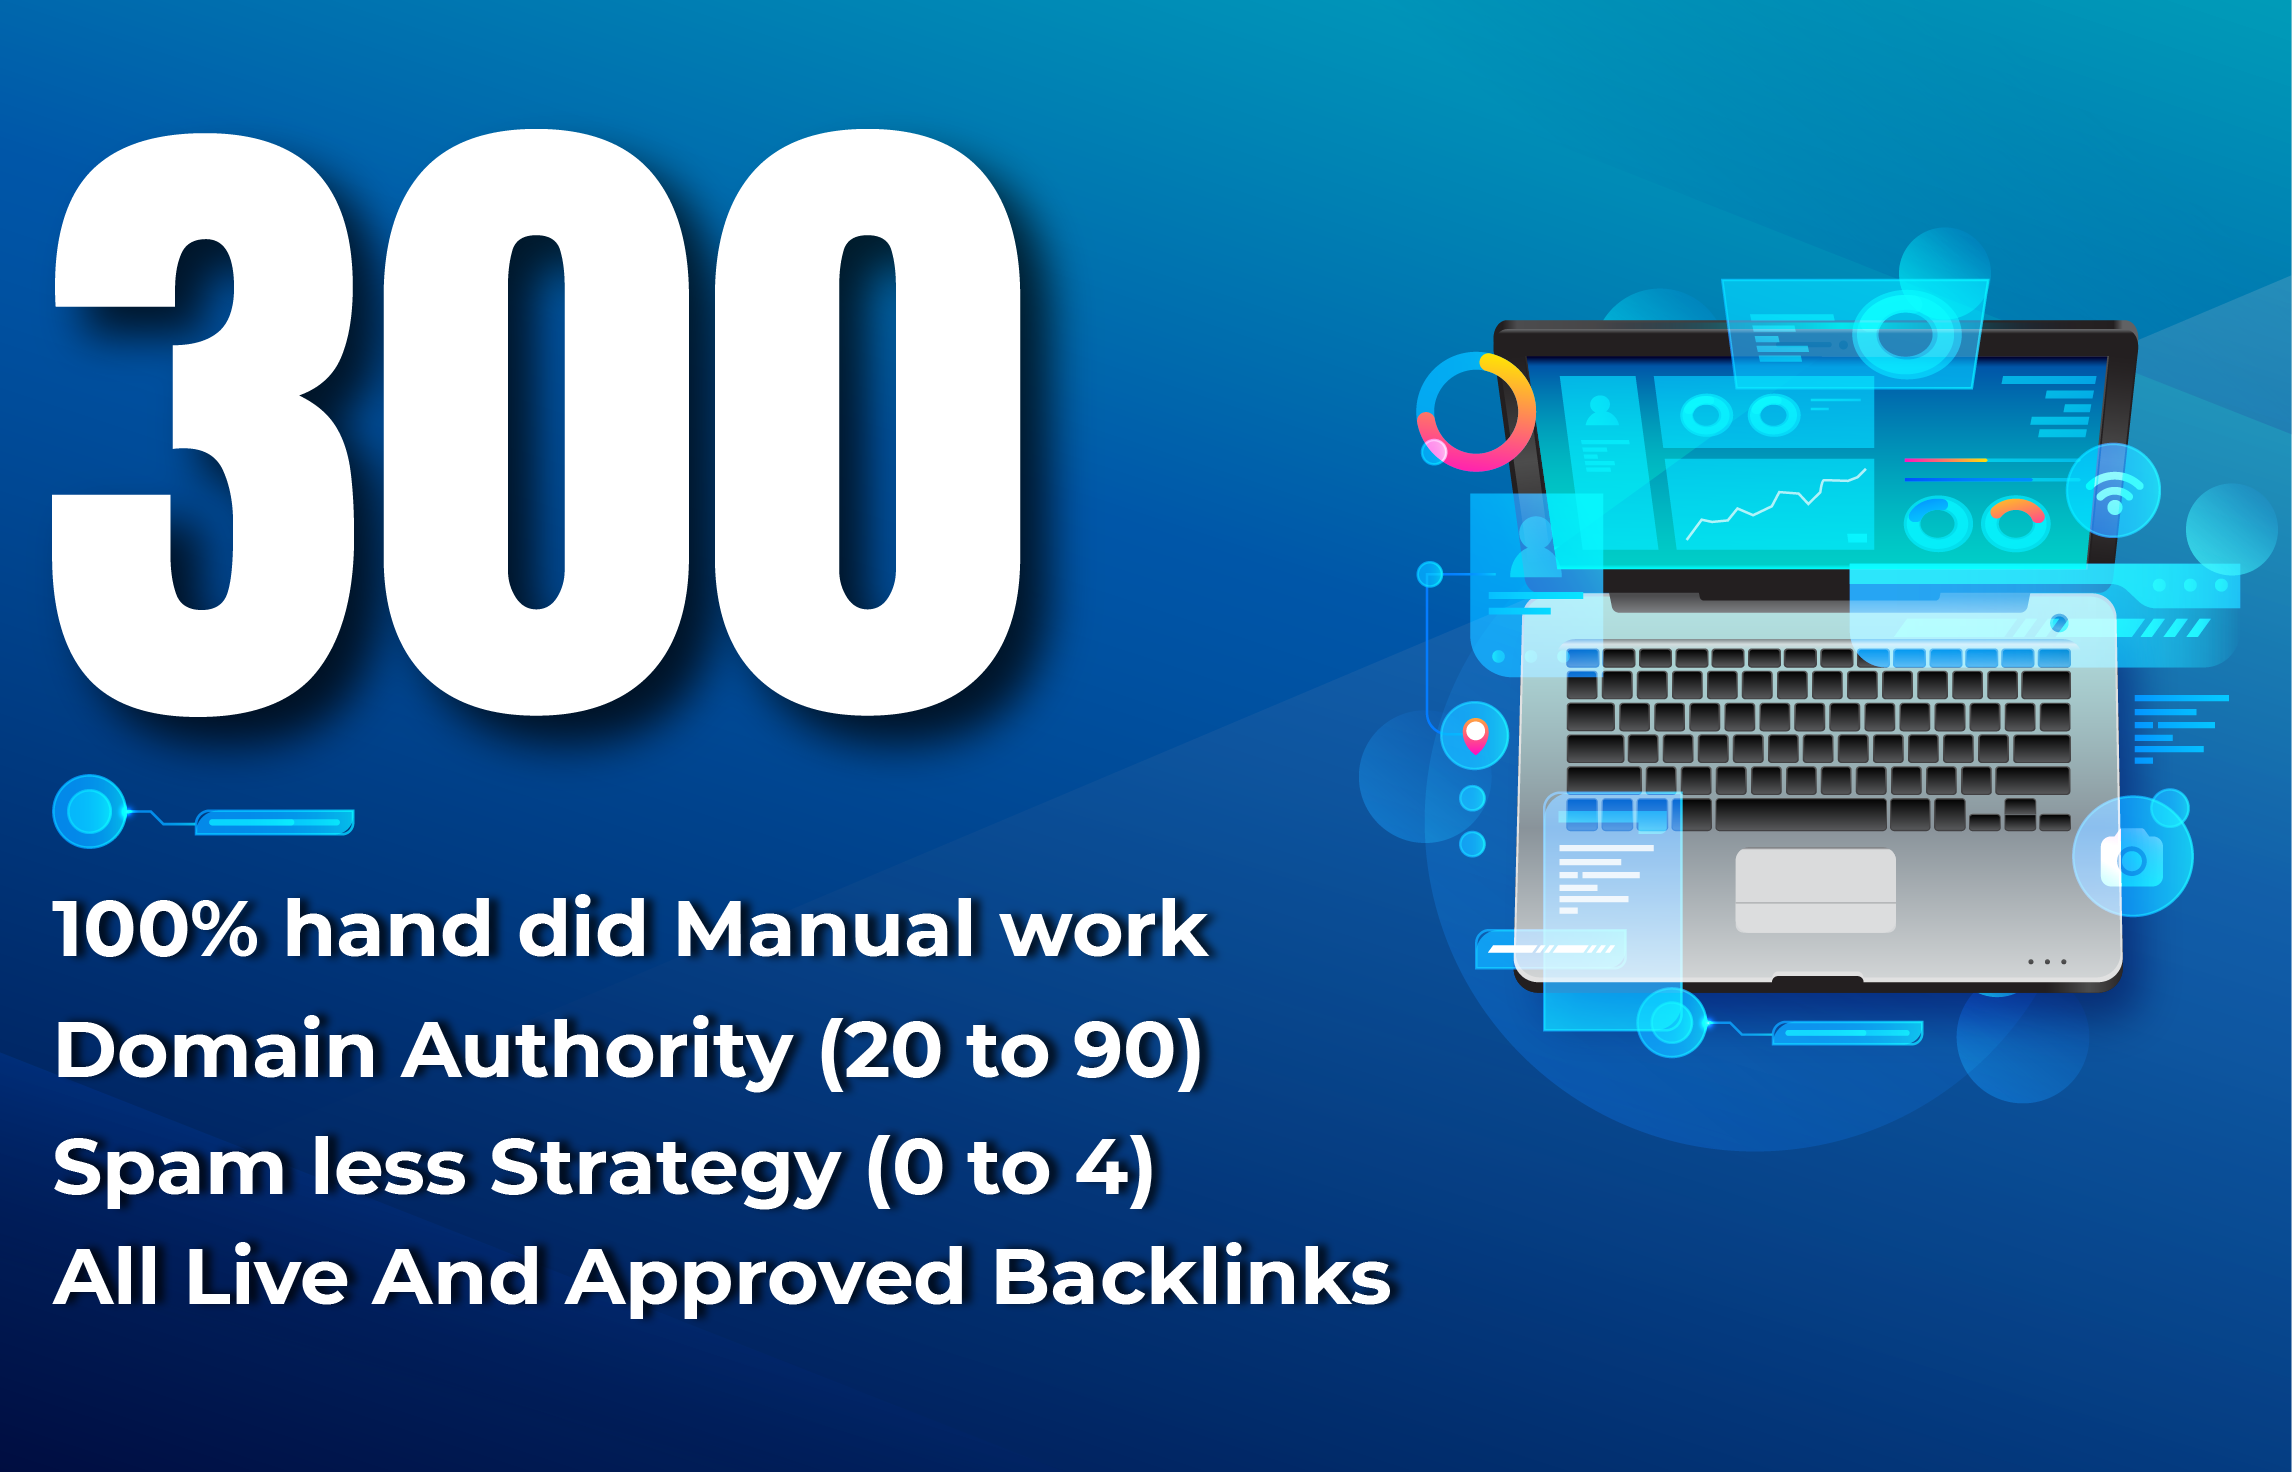 I Will Manually Create 300 High Quality Dofollow Blog Comments High Authority Backlinks